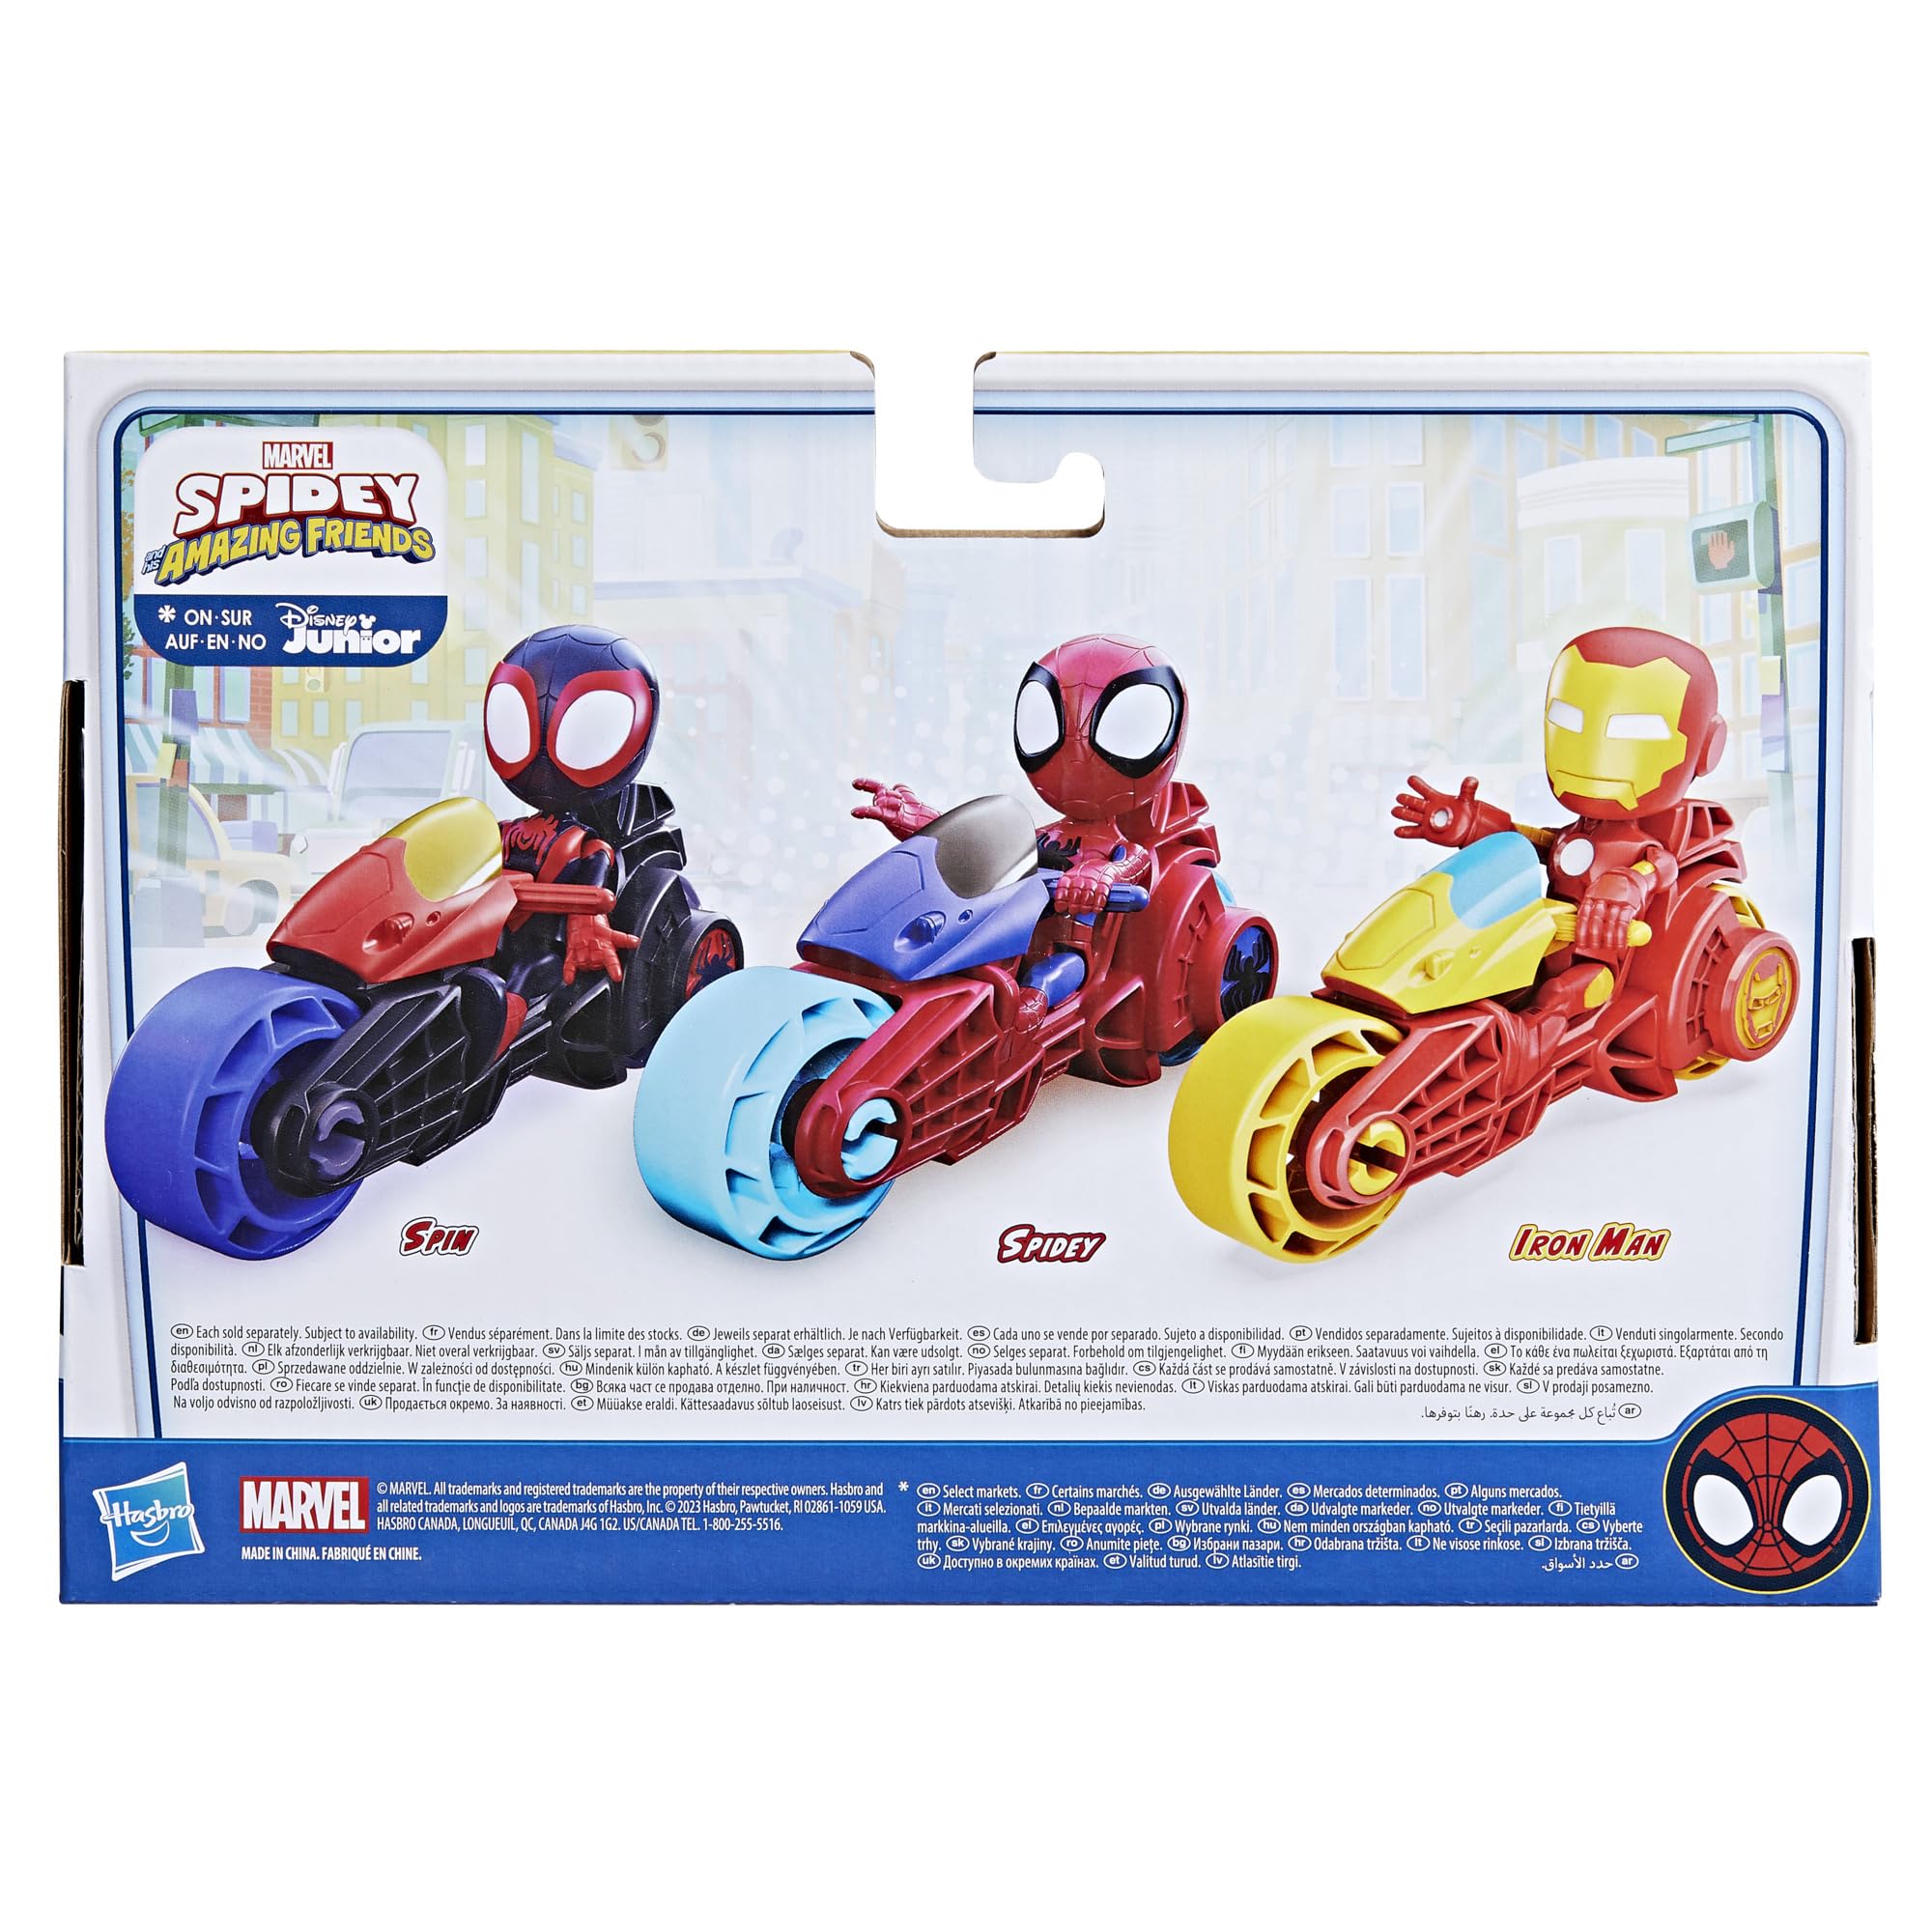 SPIDEY AND HIS AMAZING FRIENDS, Iron Man Action Figure & Toy Motorcycle Playset, Marvel Super Hero Preschool Toys for Kids 3 and Up